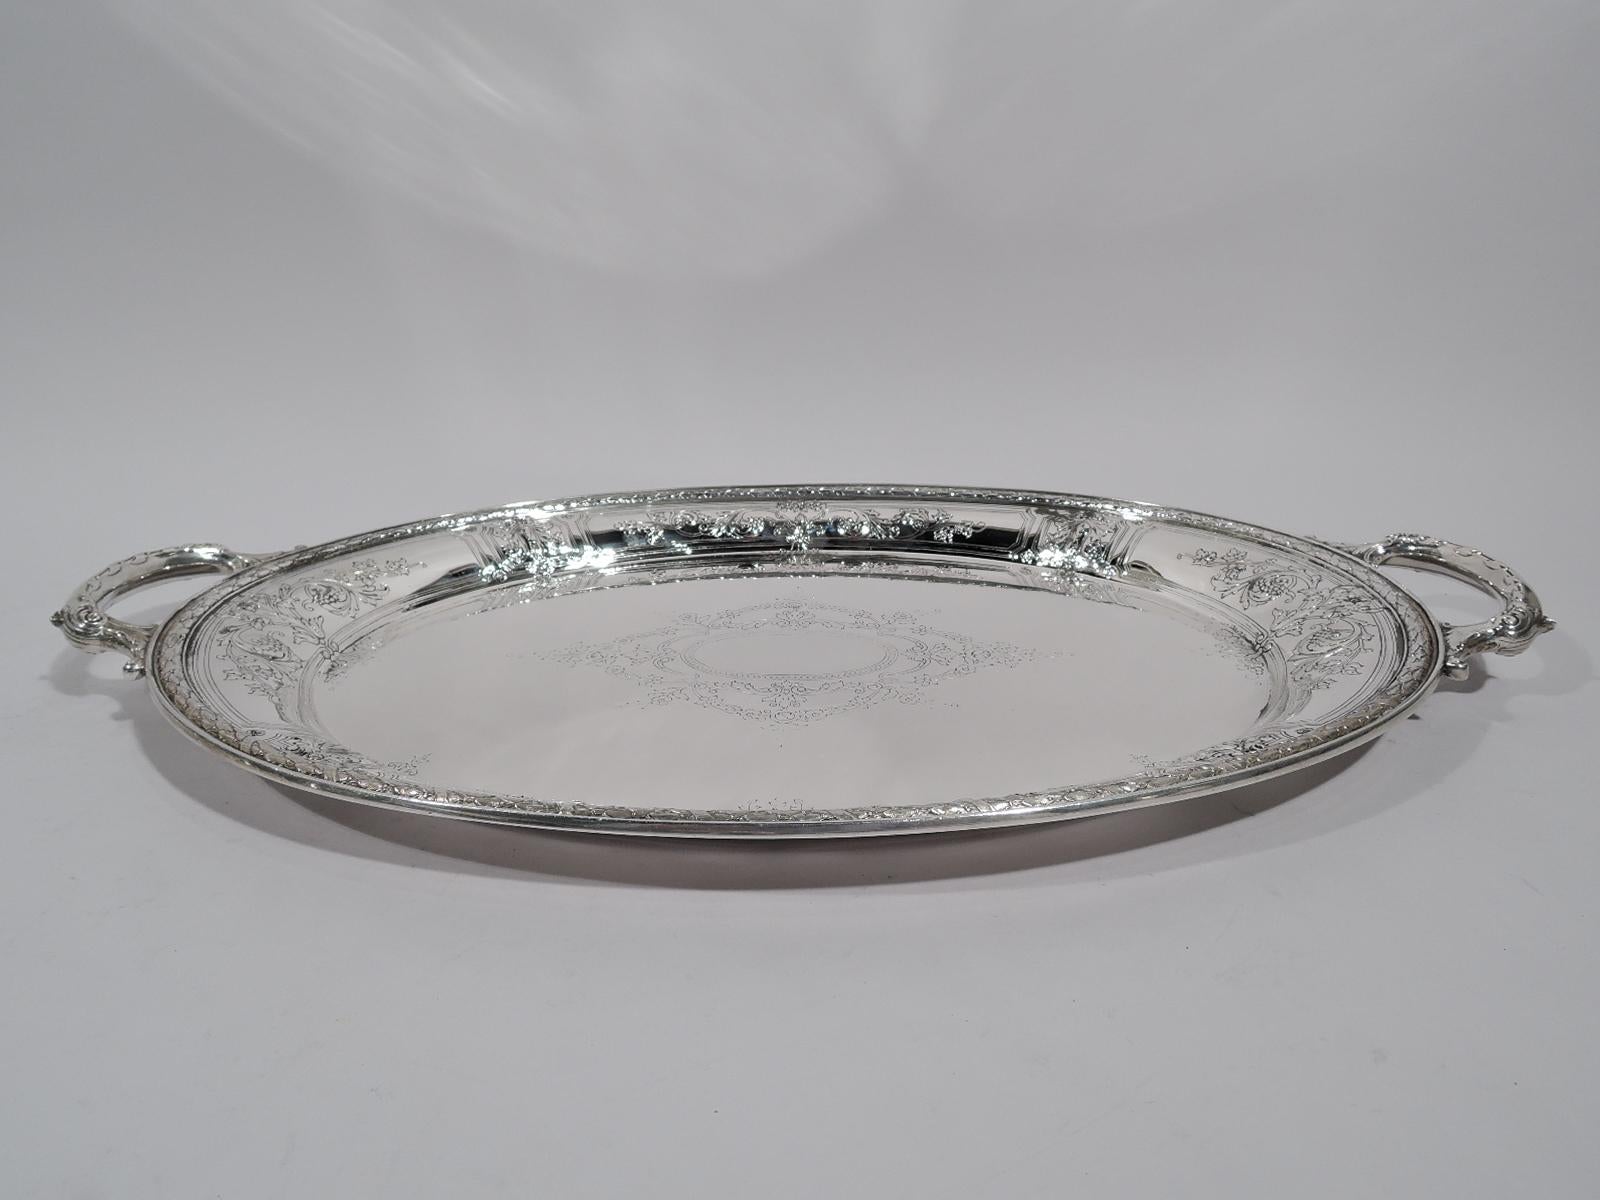 Maintenon sterling silver serving tray. Made by Gorham in Providence in 1925. Oval with leaf-capped and-mounted c-scroll side handles. Well has engraved beaded oval frame (vacant) surrounded by garlands and pendant flowers. Tapering shoulder with